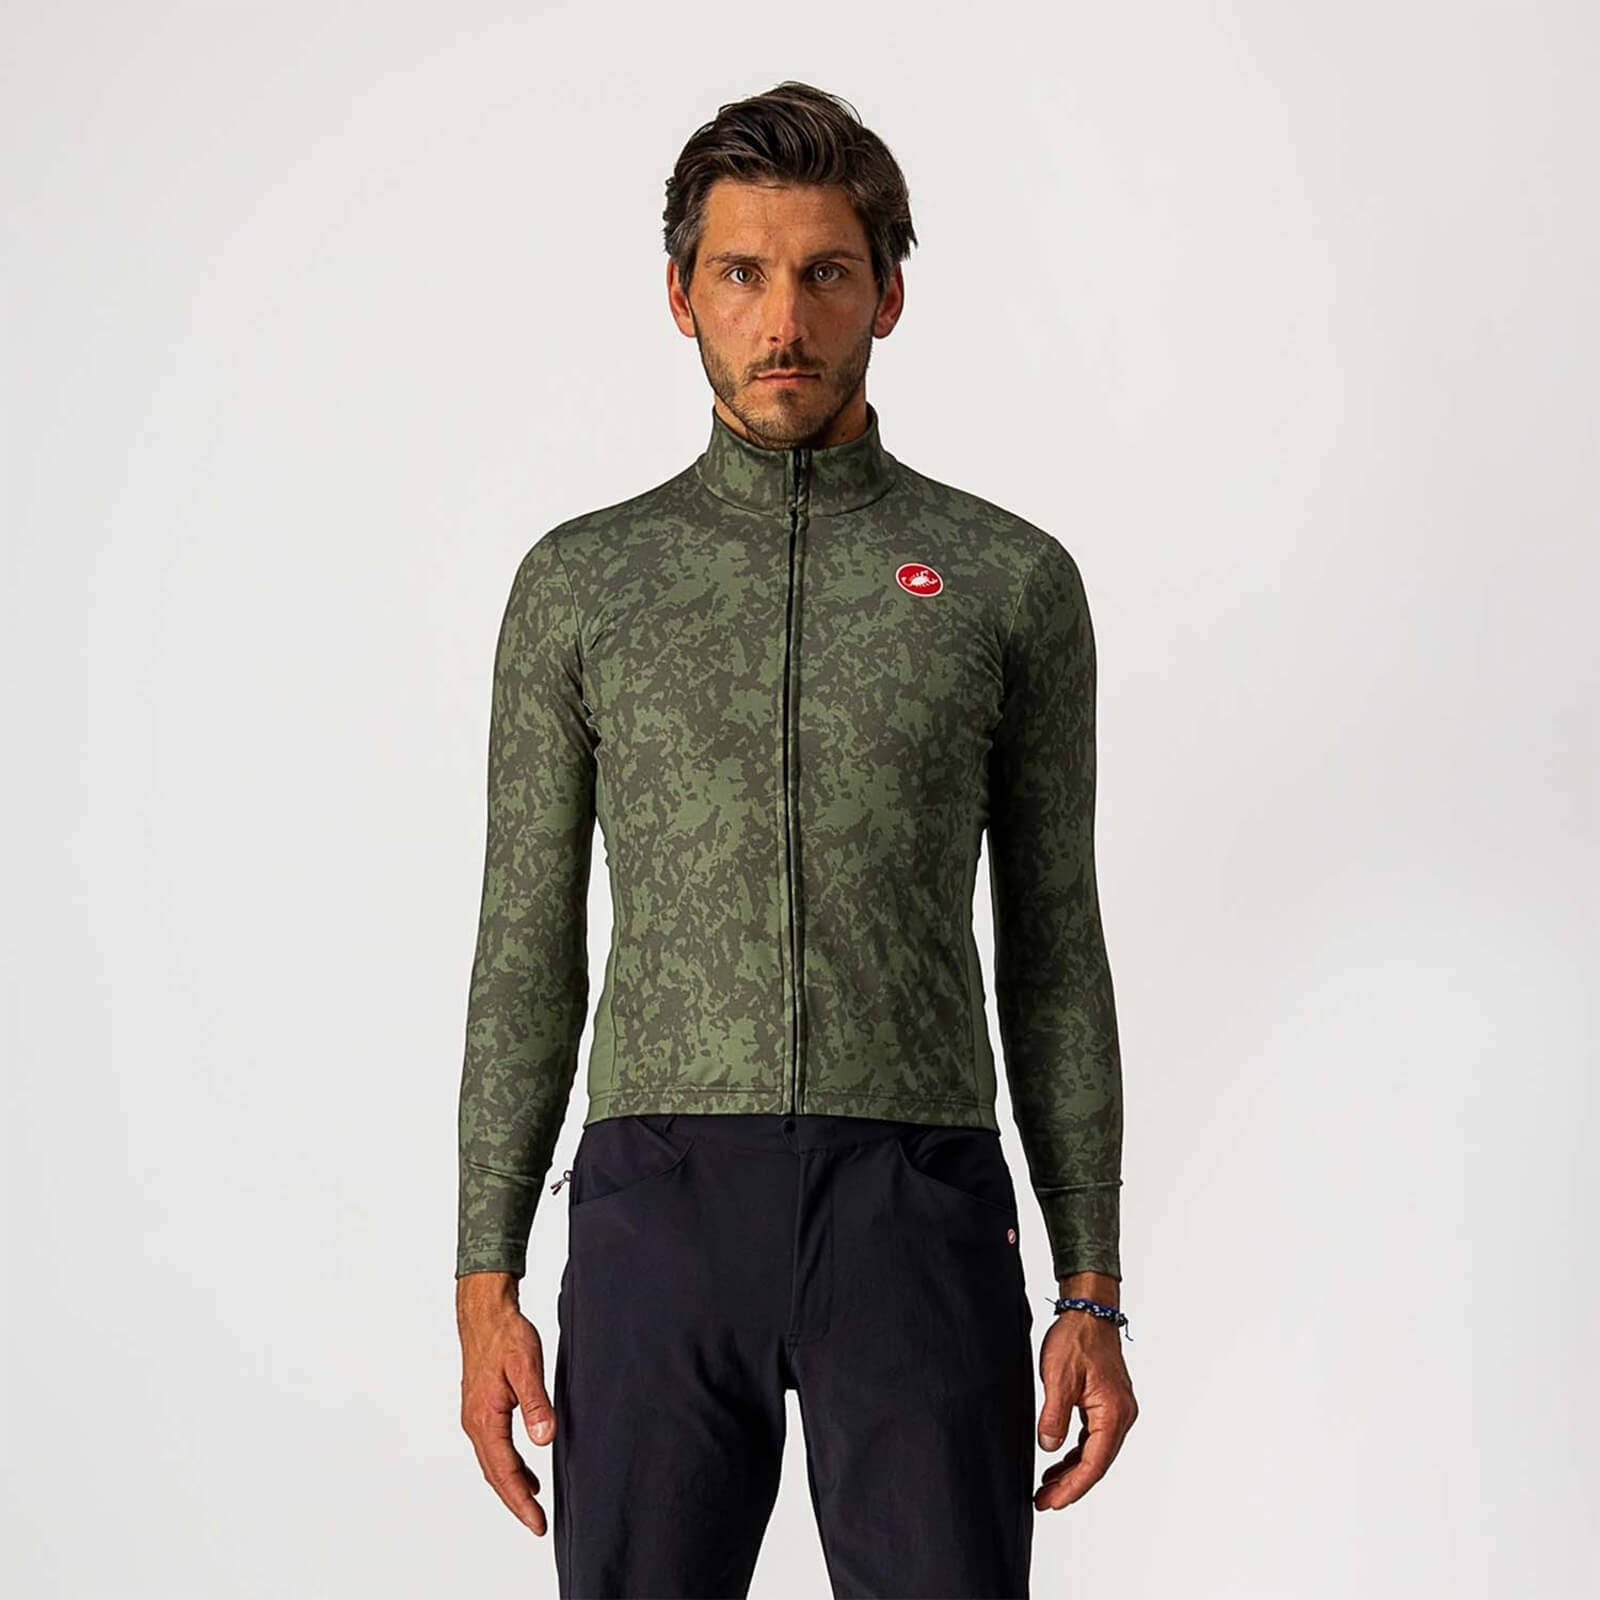 Castelli Unlimited Thermal Jersey - XS - Military Green/Light Military